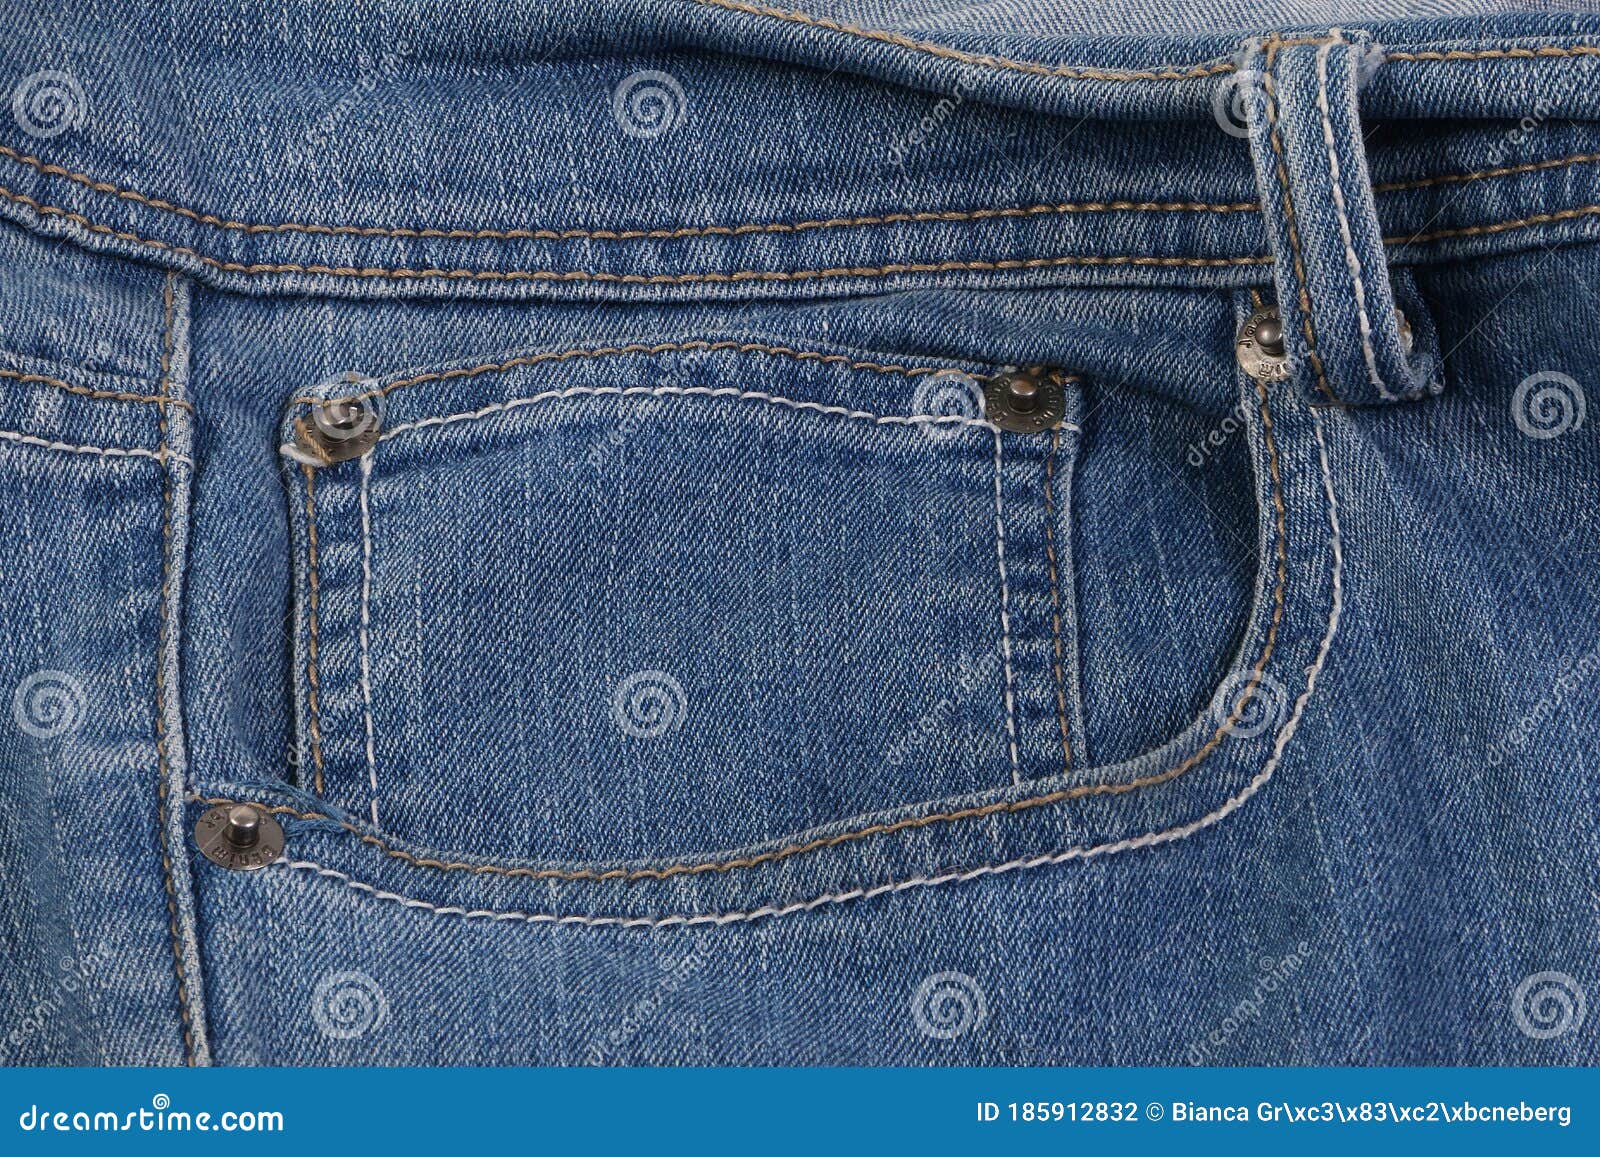 Close-up of a Double Pocket of a Jeans Pant Stock Photo - Image of ...